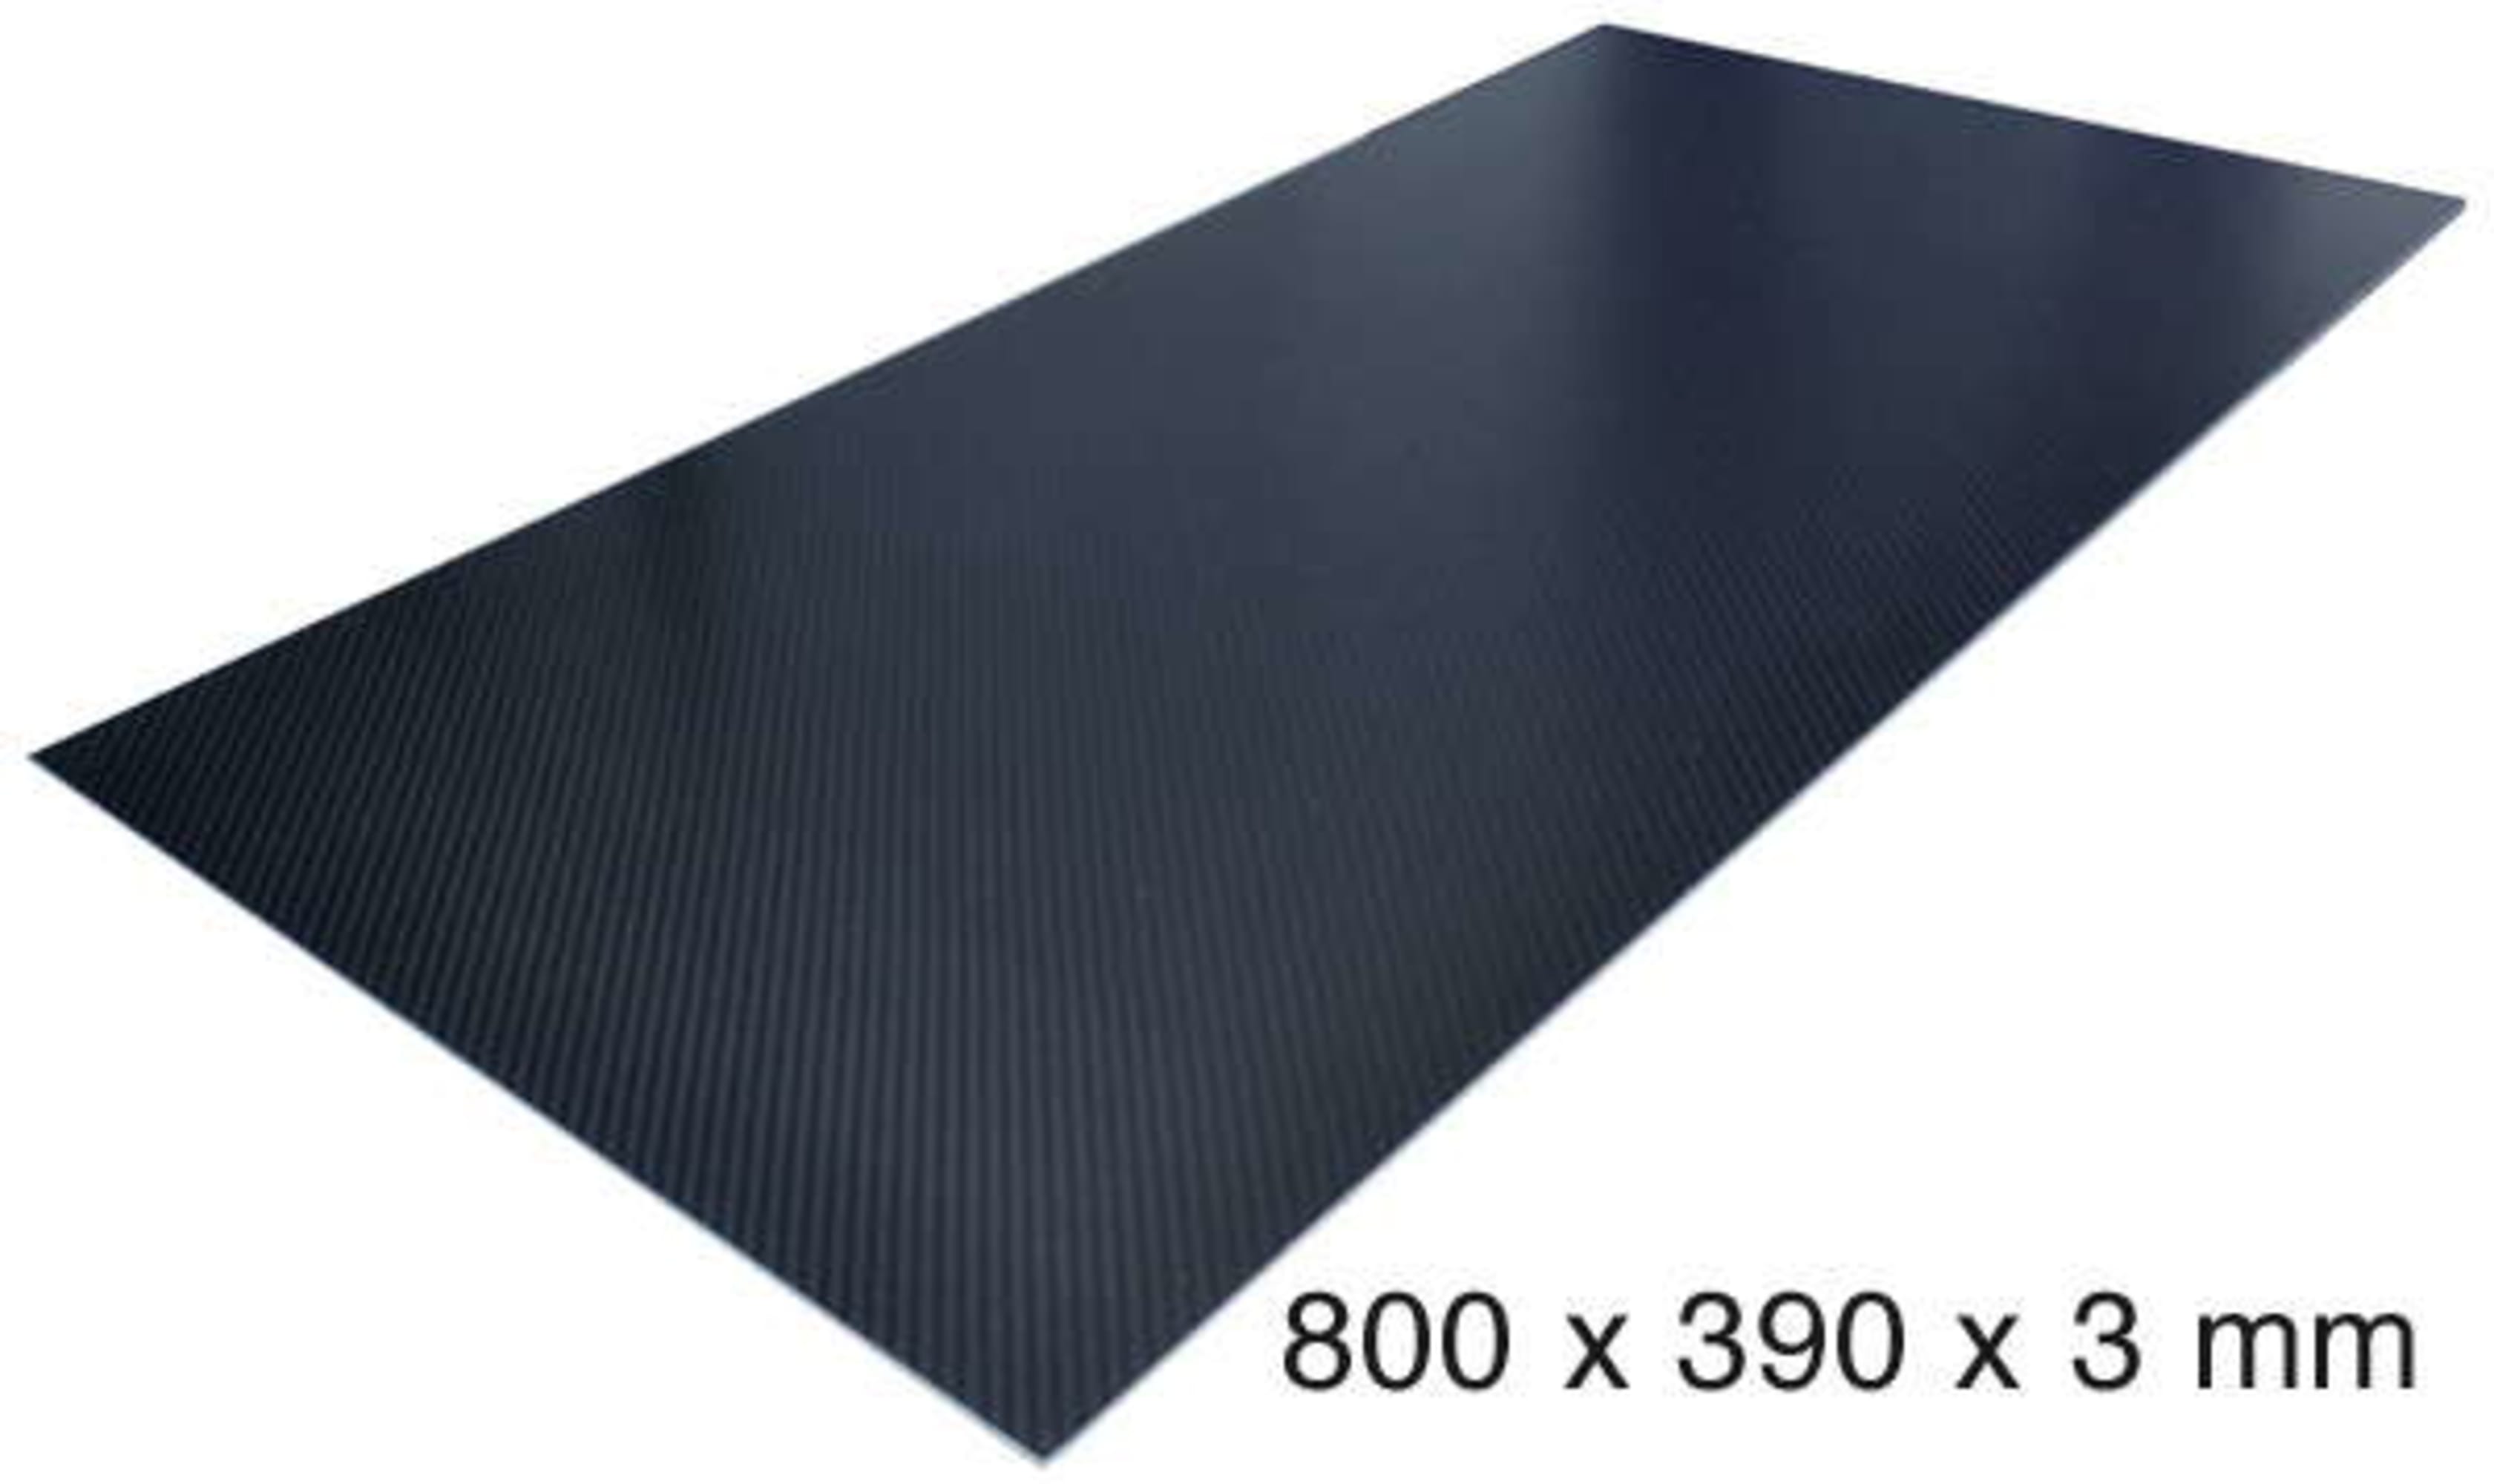 CARBON fibre sandwich sheets with Rohacell® 51 IG-F core, image 2